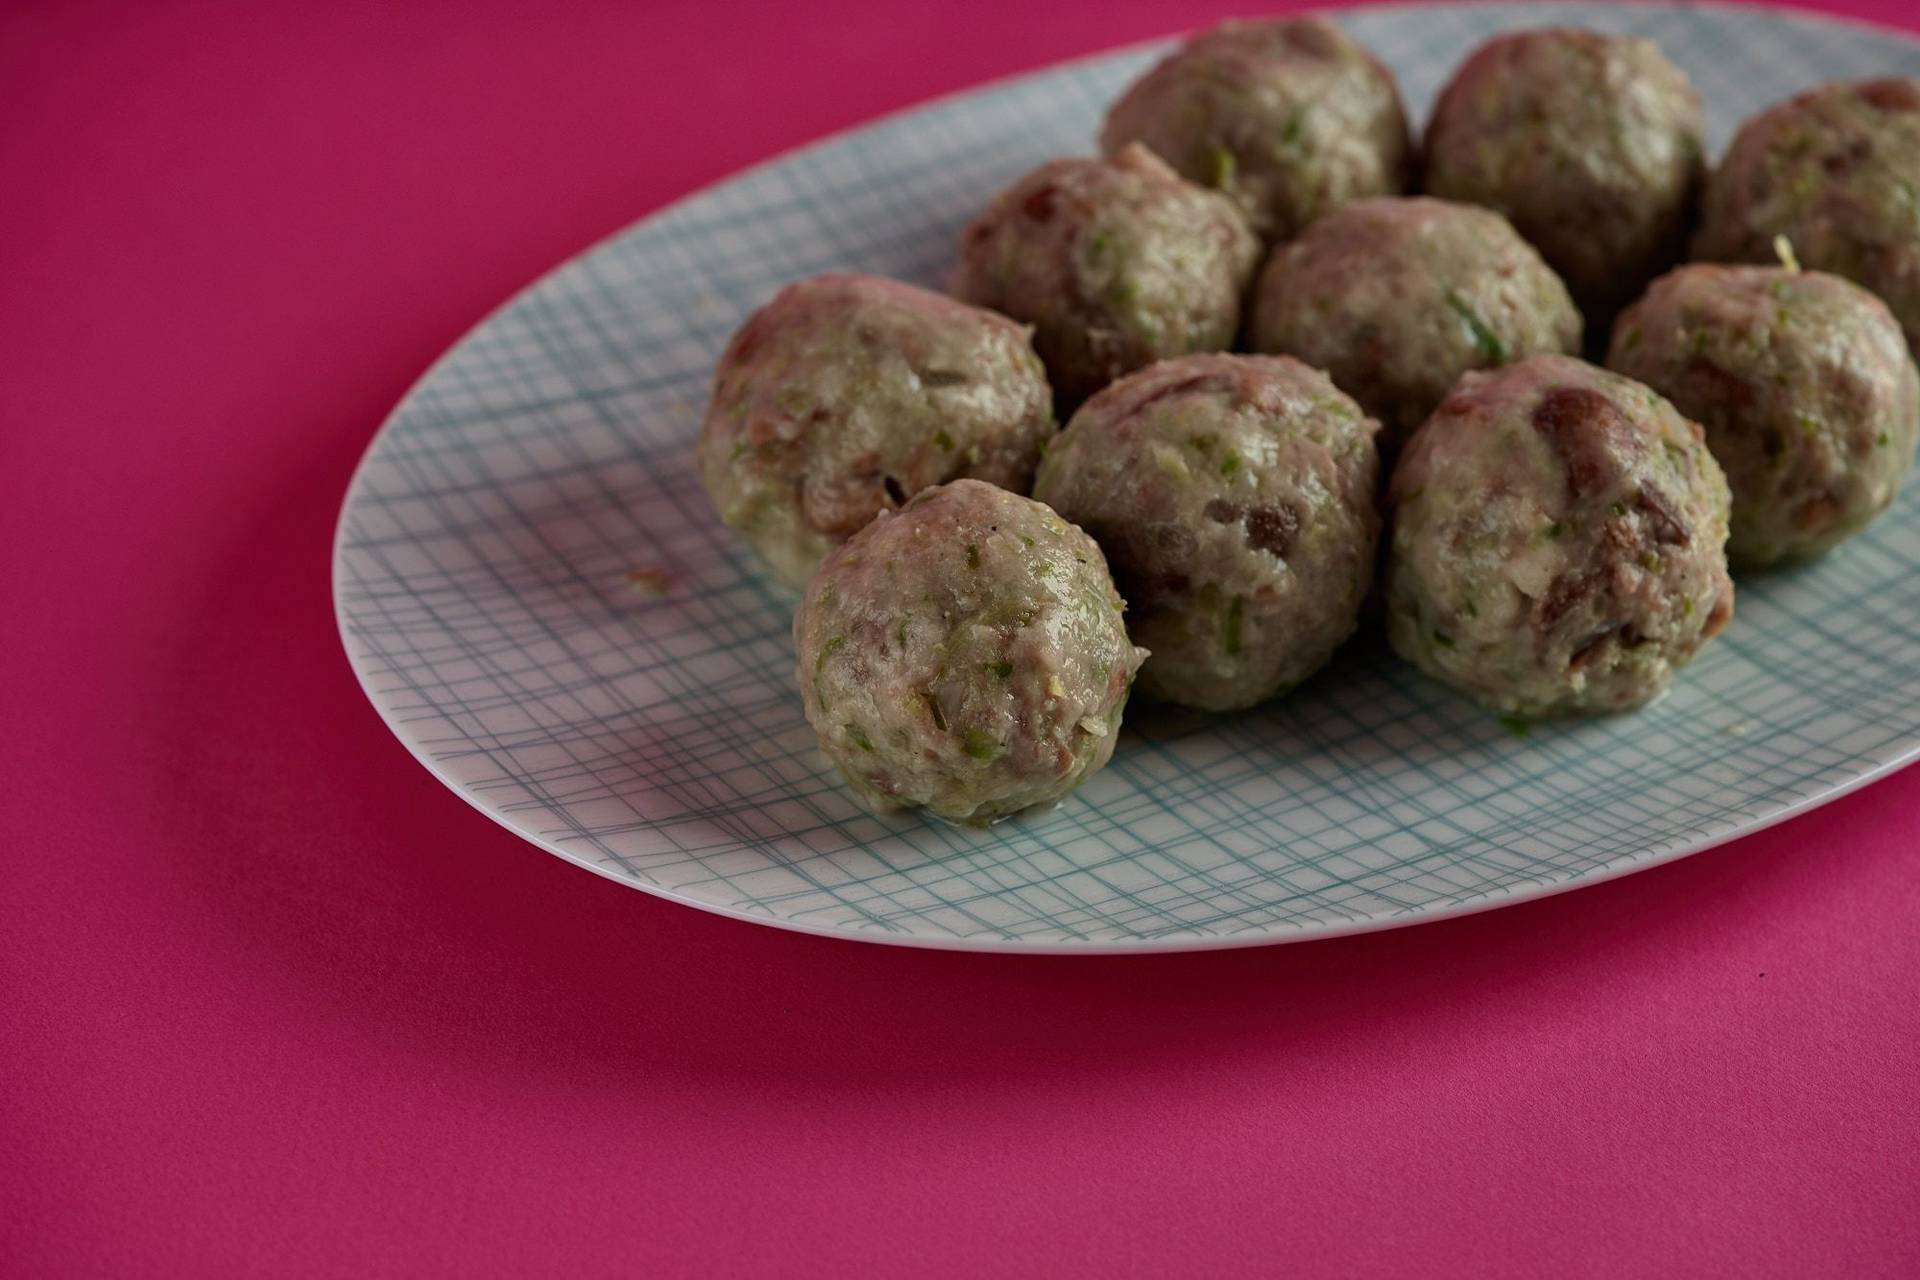 vegan bread dumplings with brussels sprouts on pink background